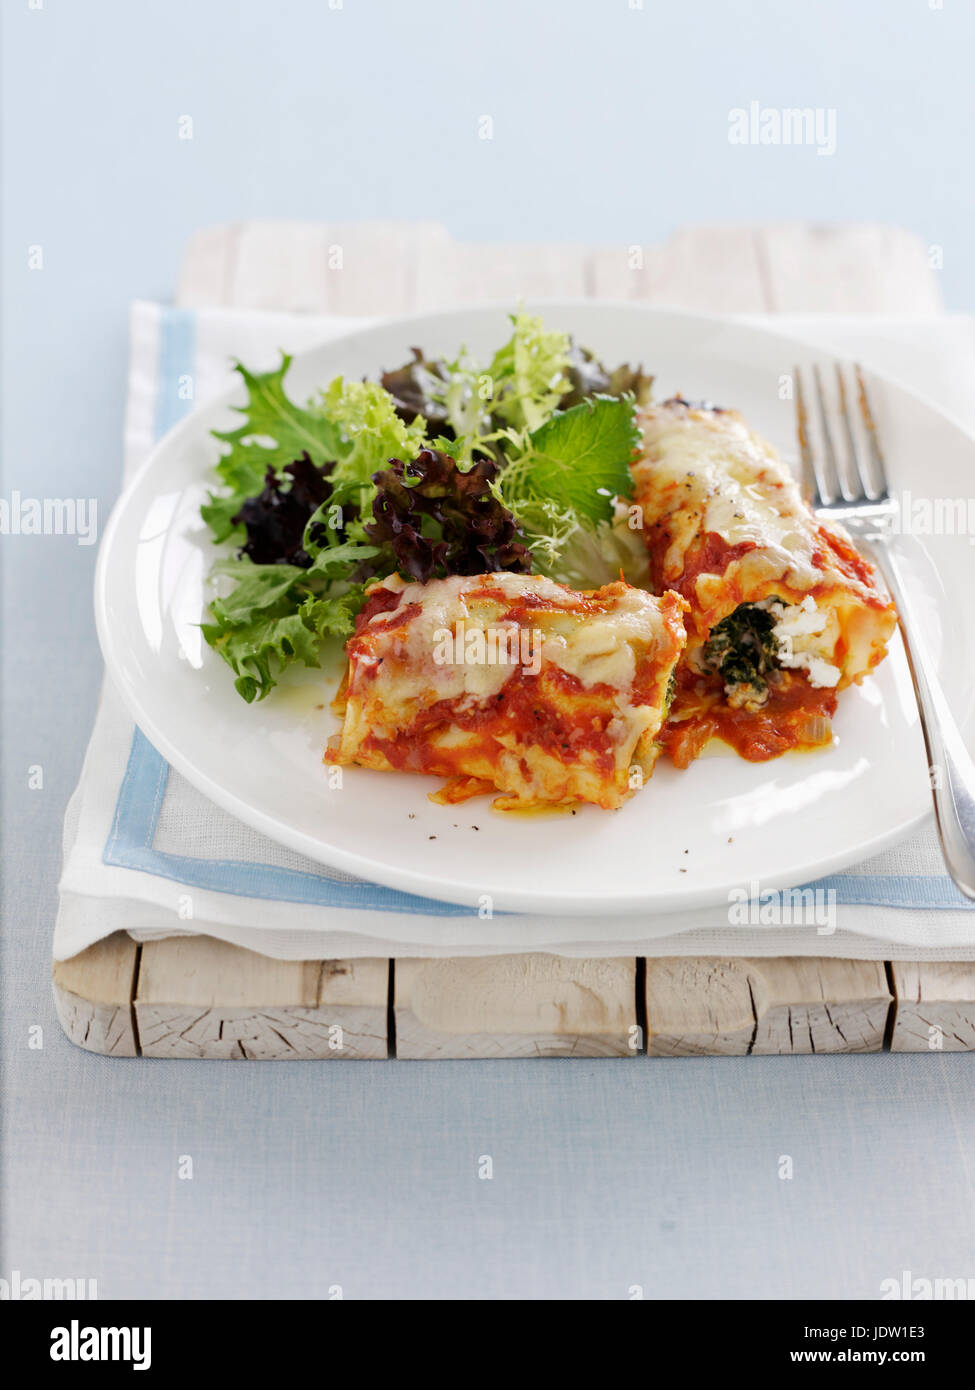 Dish of baked cannelloni Stock Photo